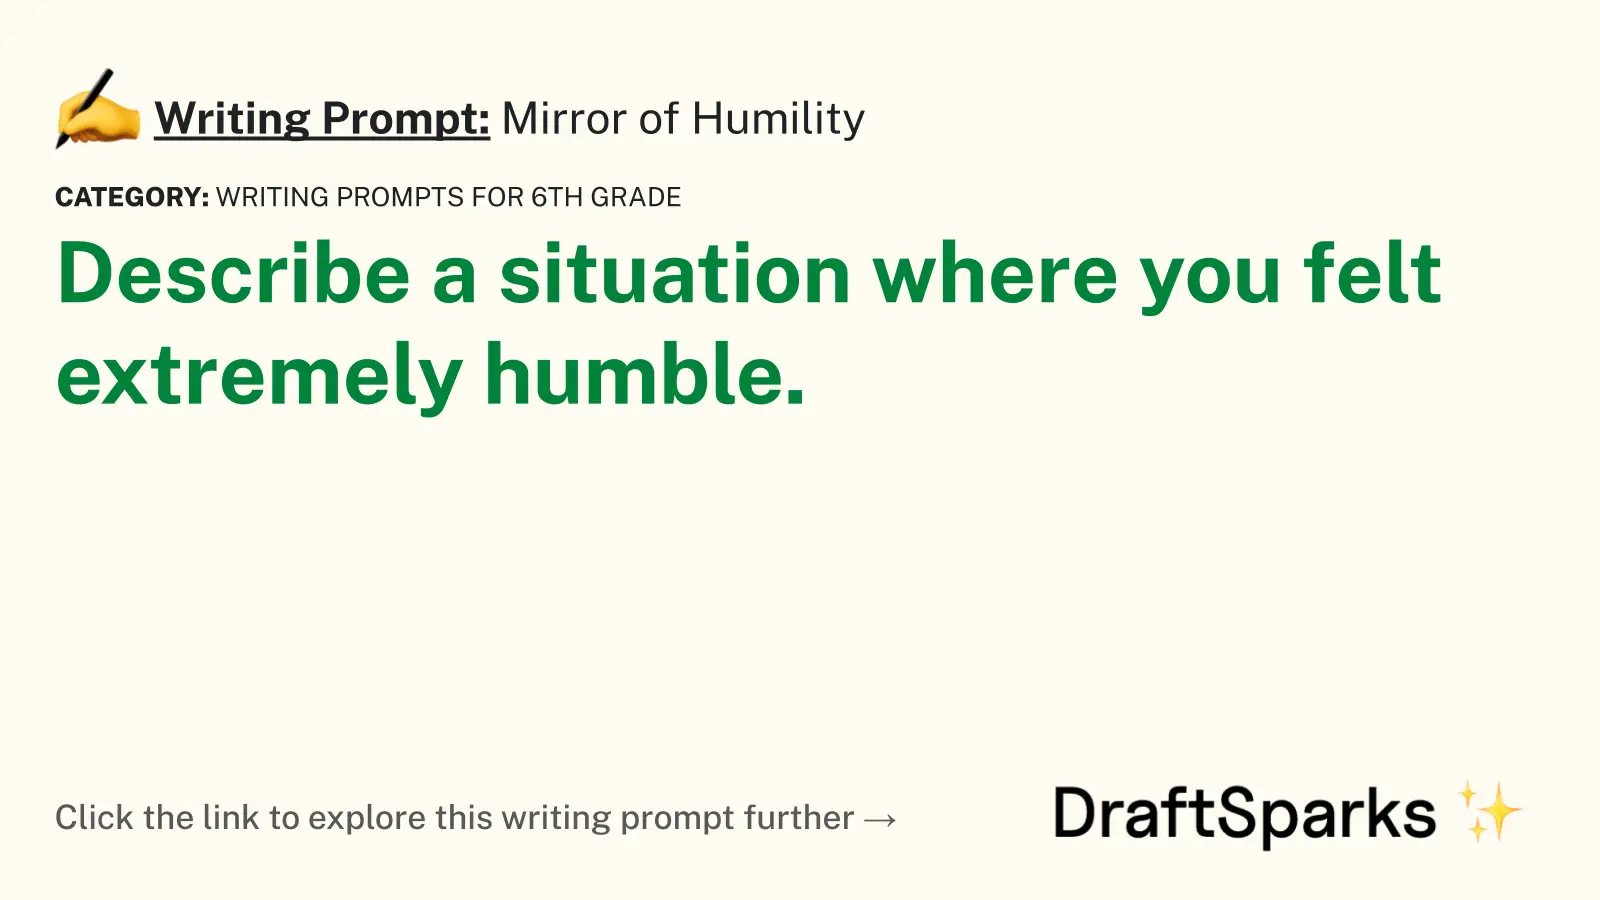 Mirror of Humility